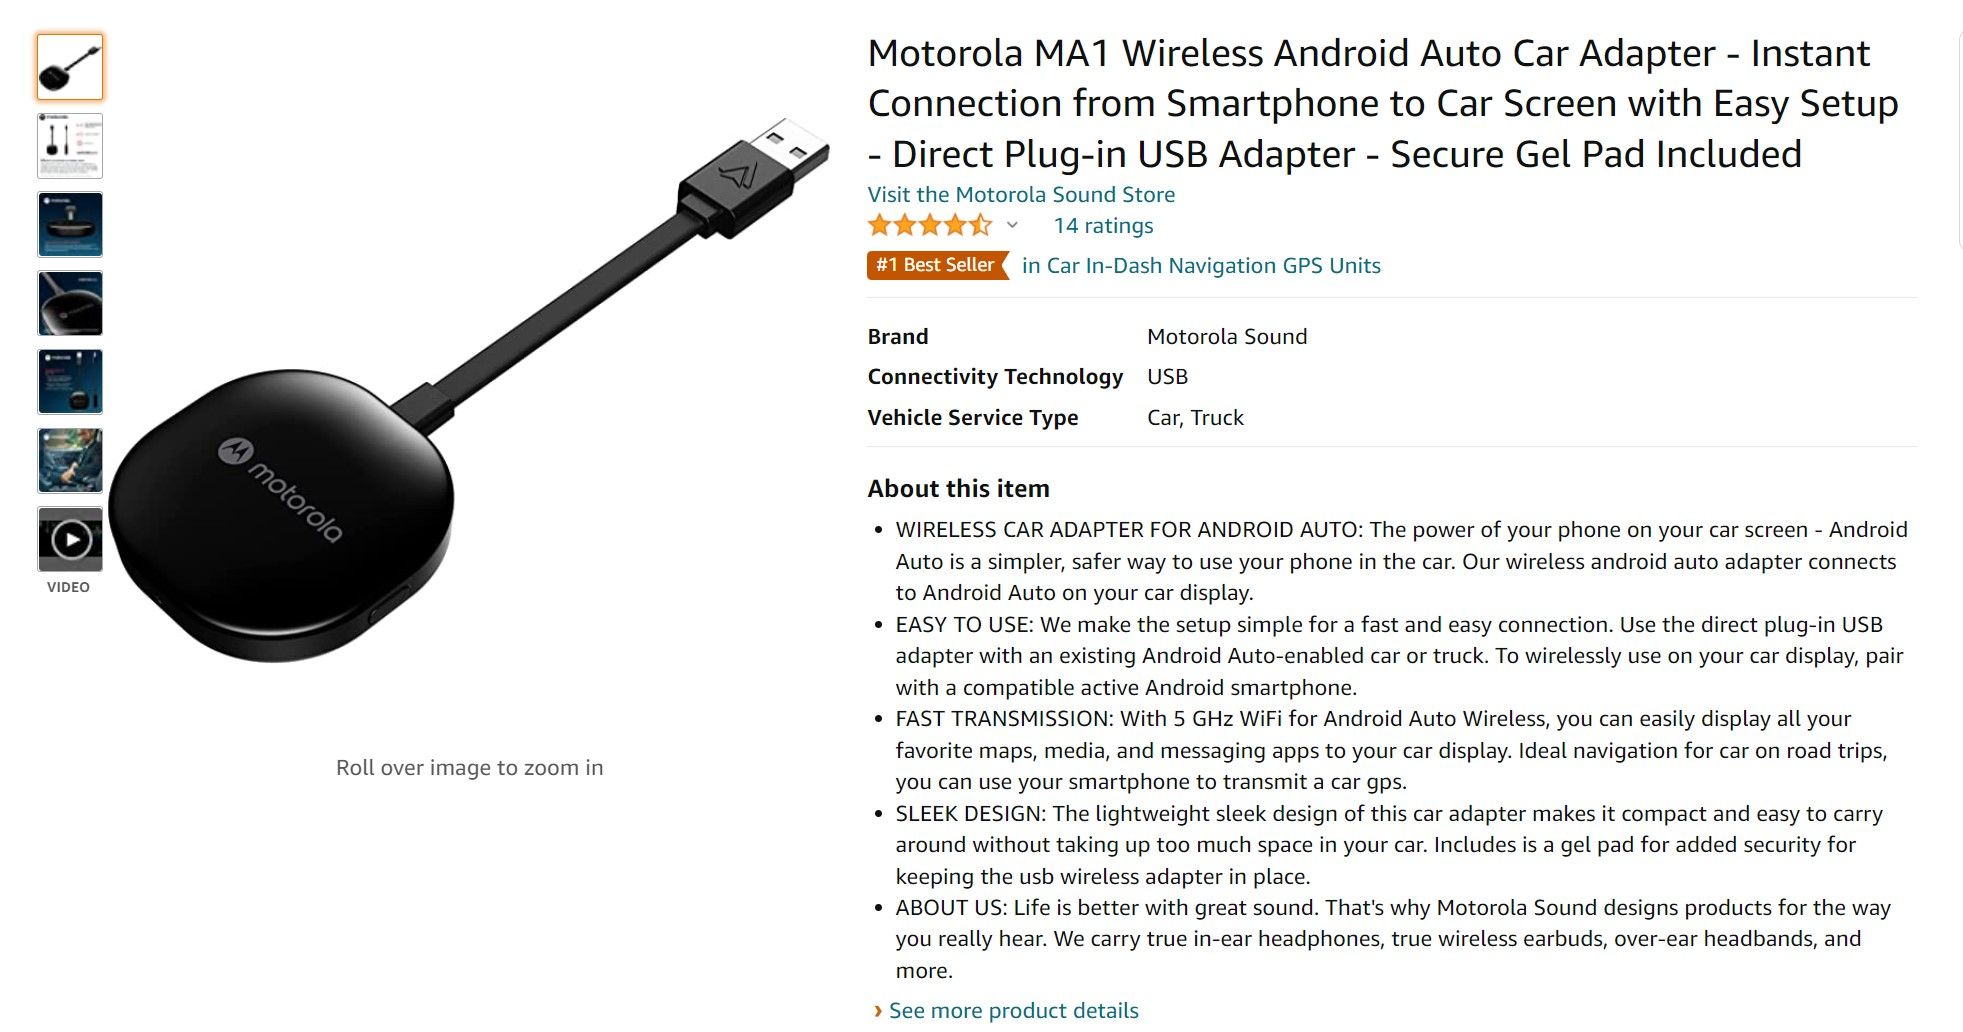 Where to buy Motorola MA1 dongle for wireless Android Auto - 9to5Google